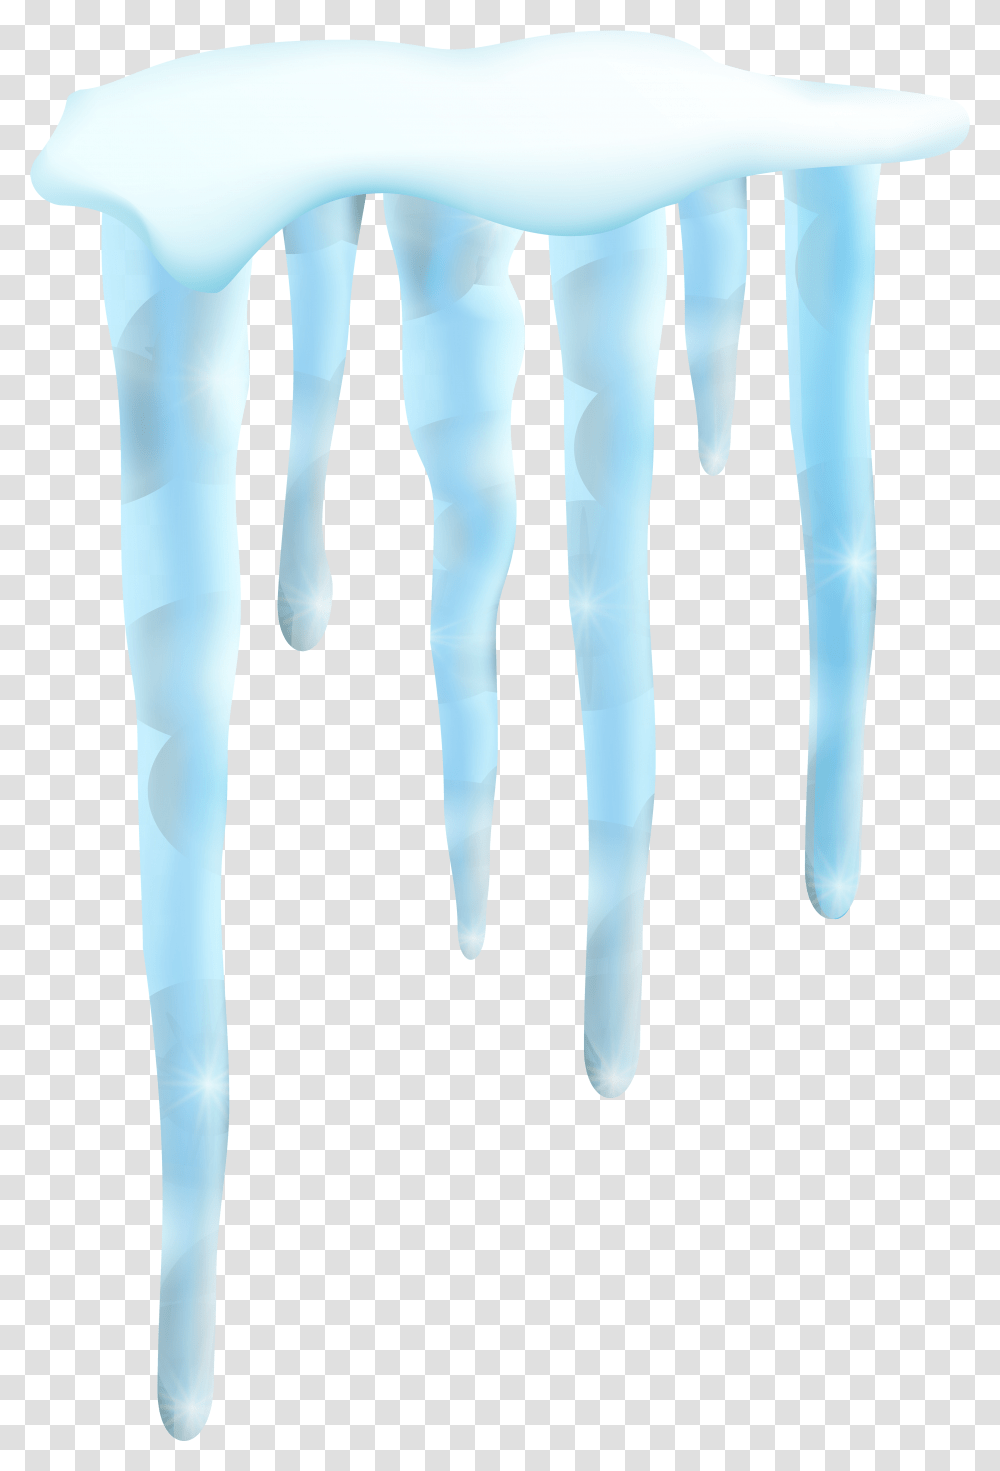 Icicles Image Background Icicles Cartoon, Nature, Ice, Outdoors, Snow Transparent Png